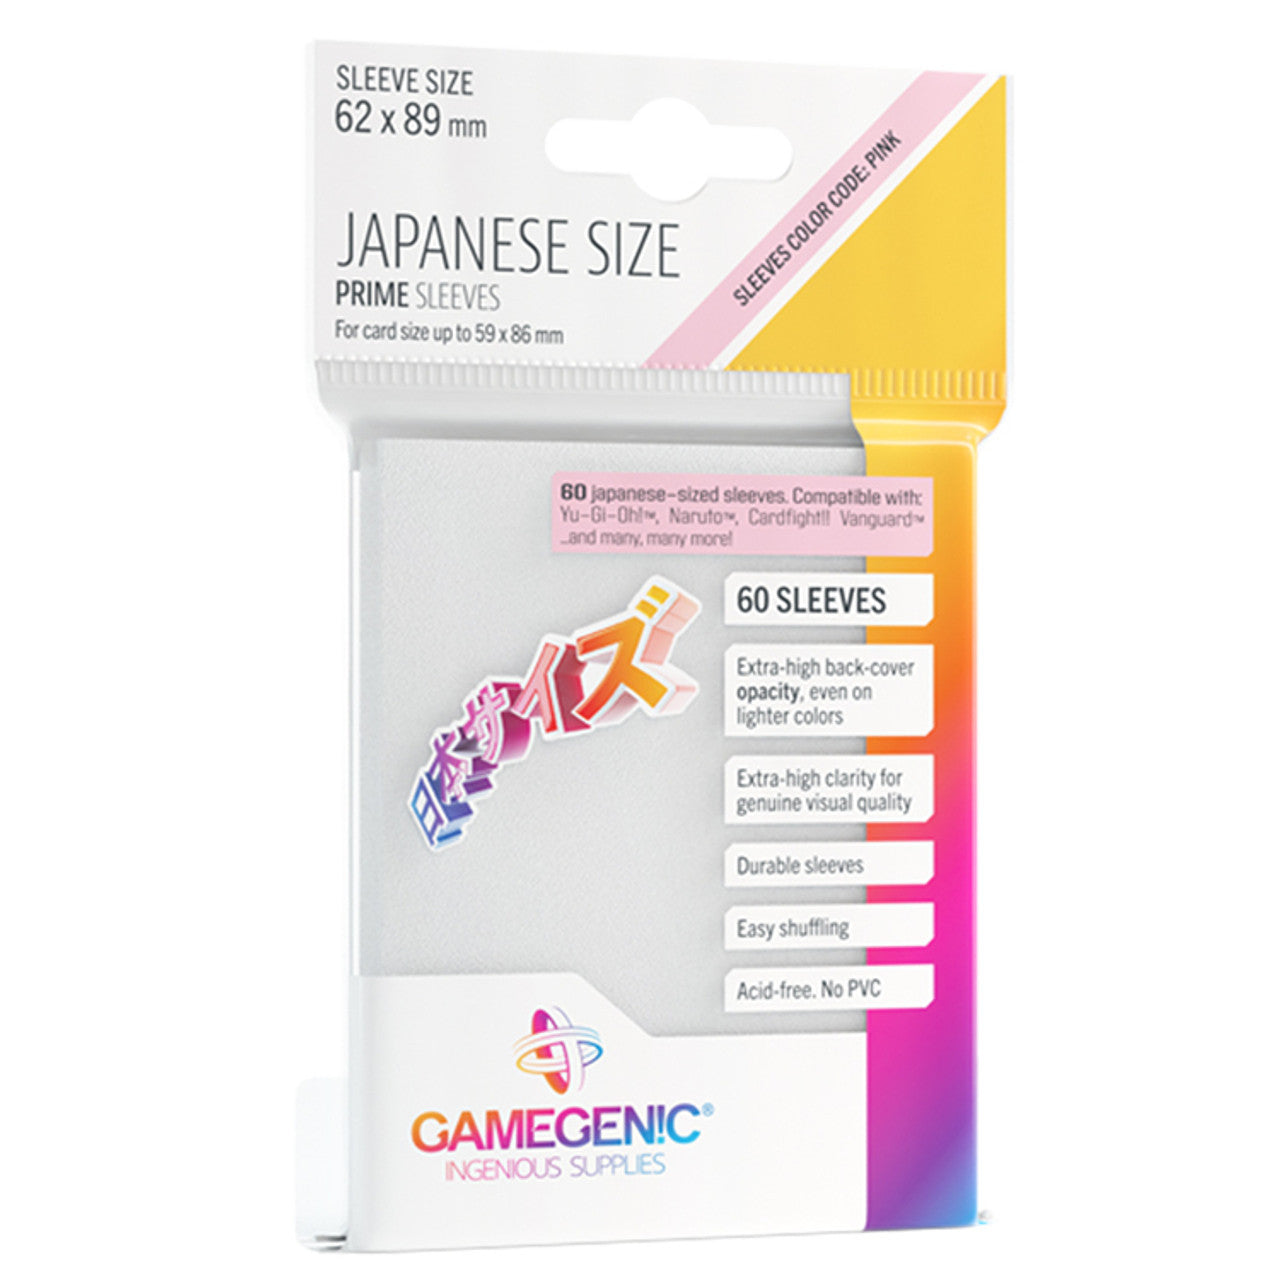 Game Genic: White Prime Sleeves - Japanese Size (60ct)